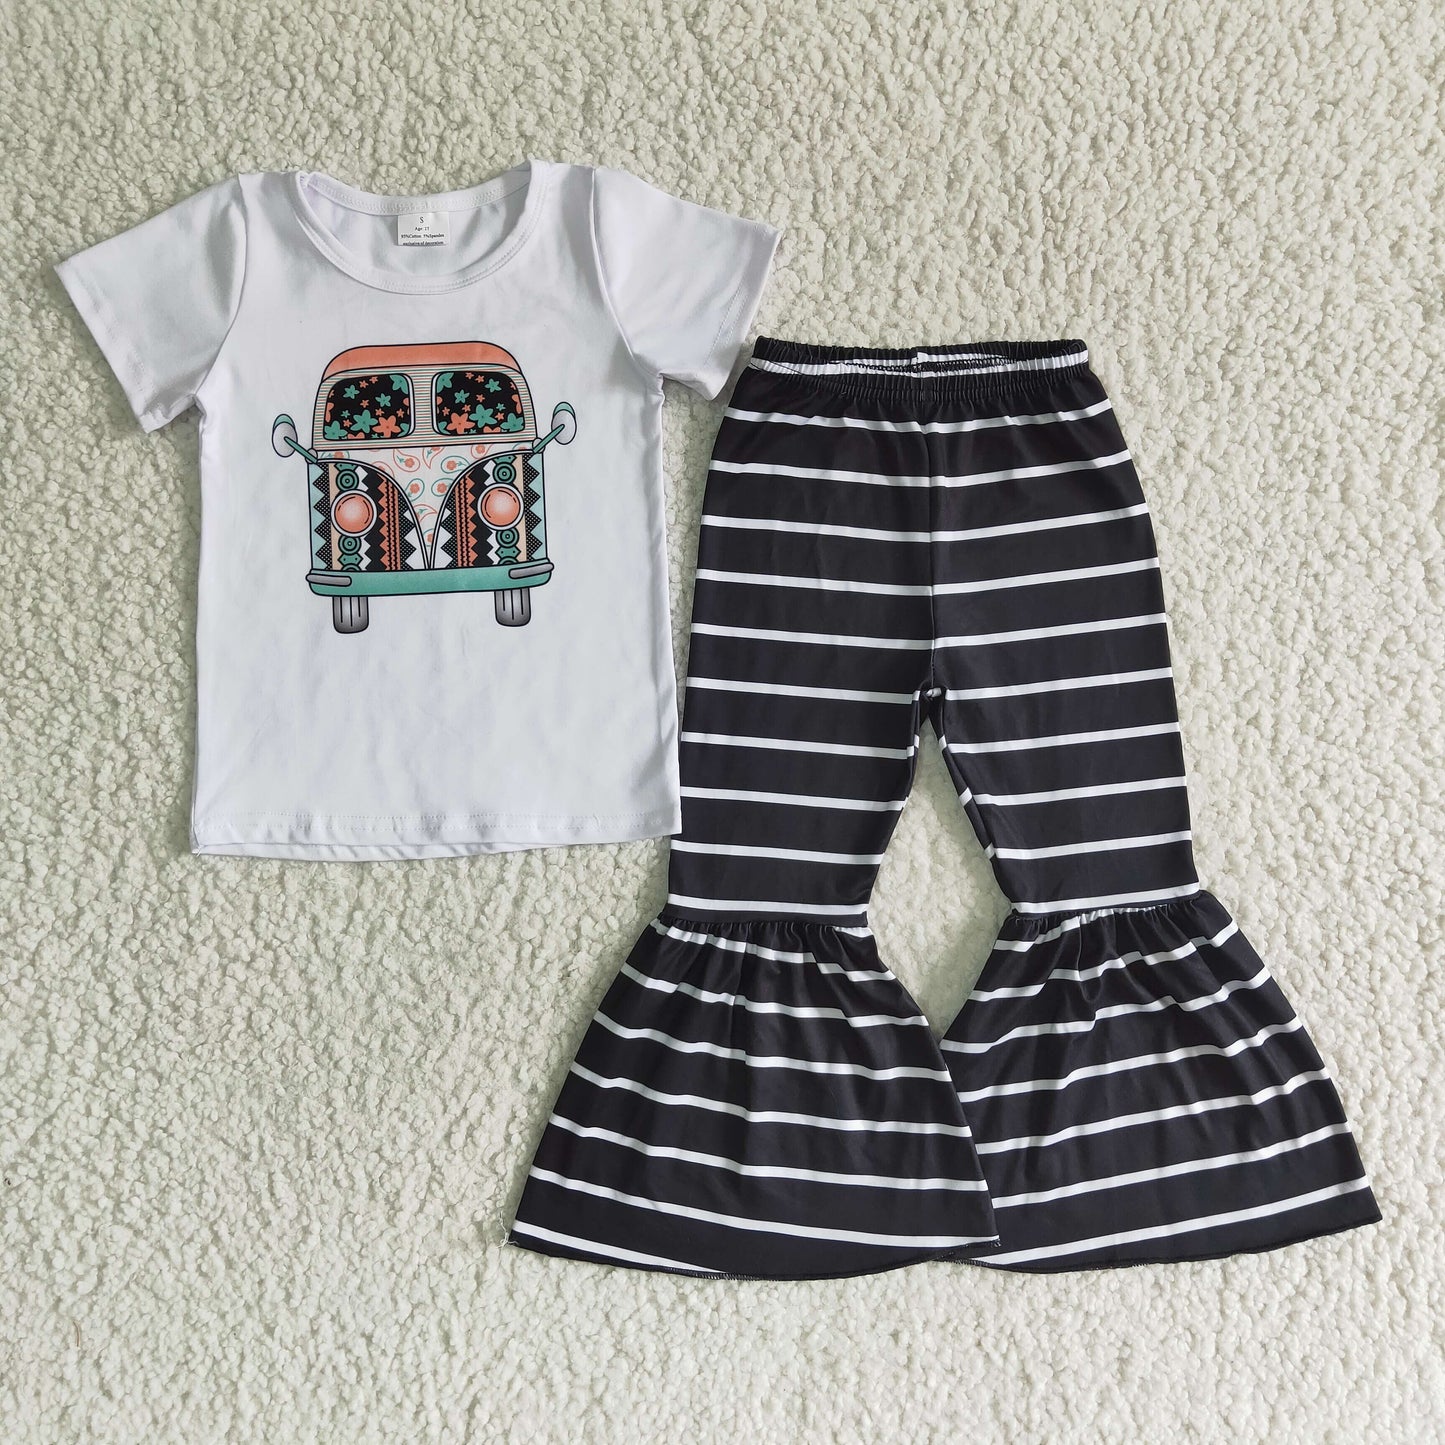 Clearance B5-9 Back To School Bus Black Striped Girls Short Sleeve Pants Outfits